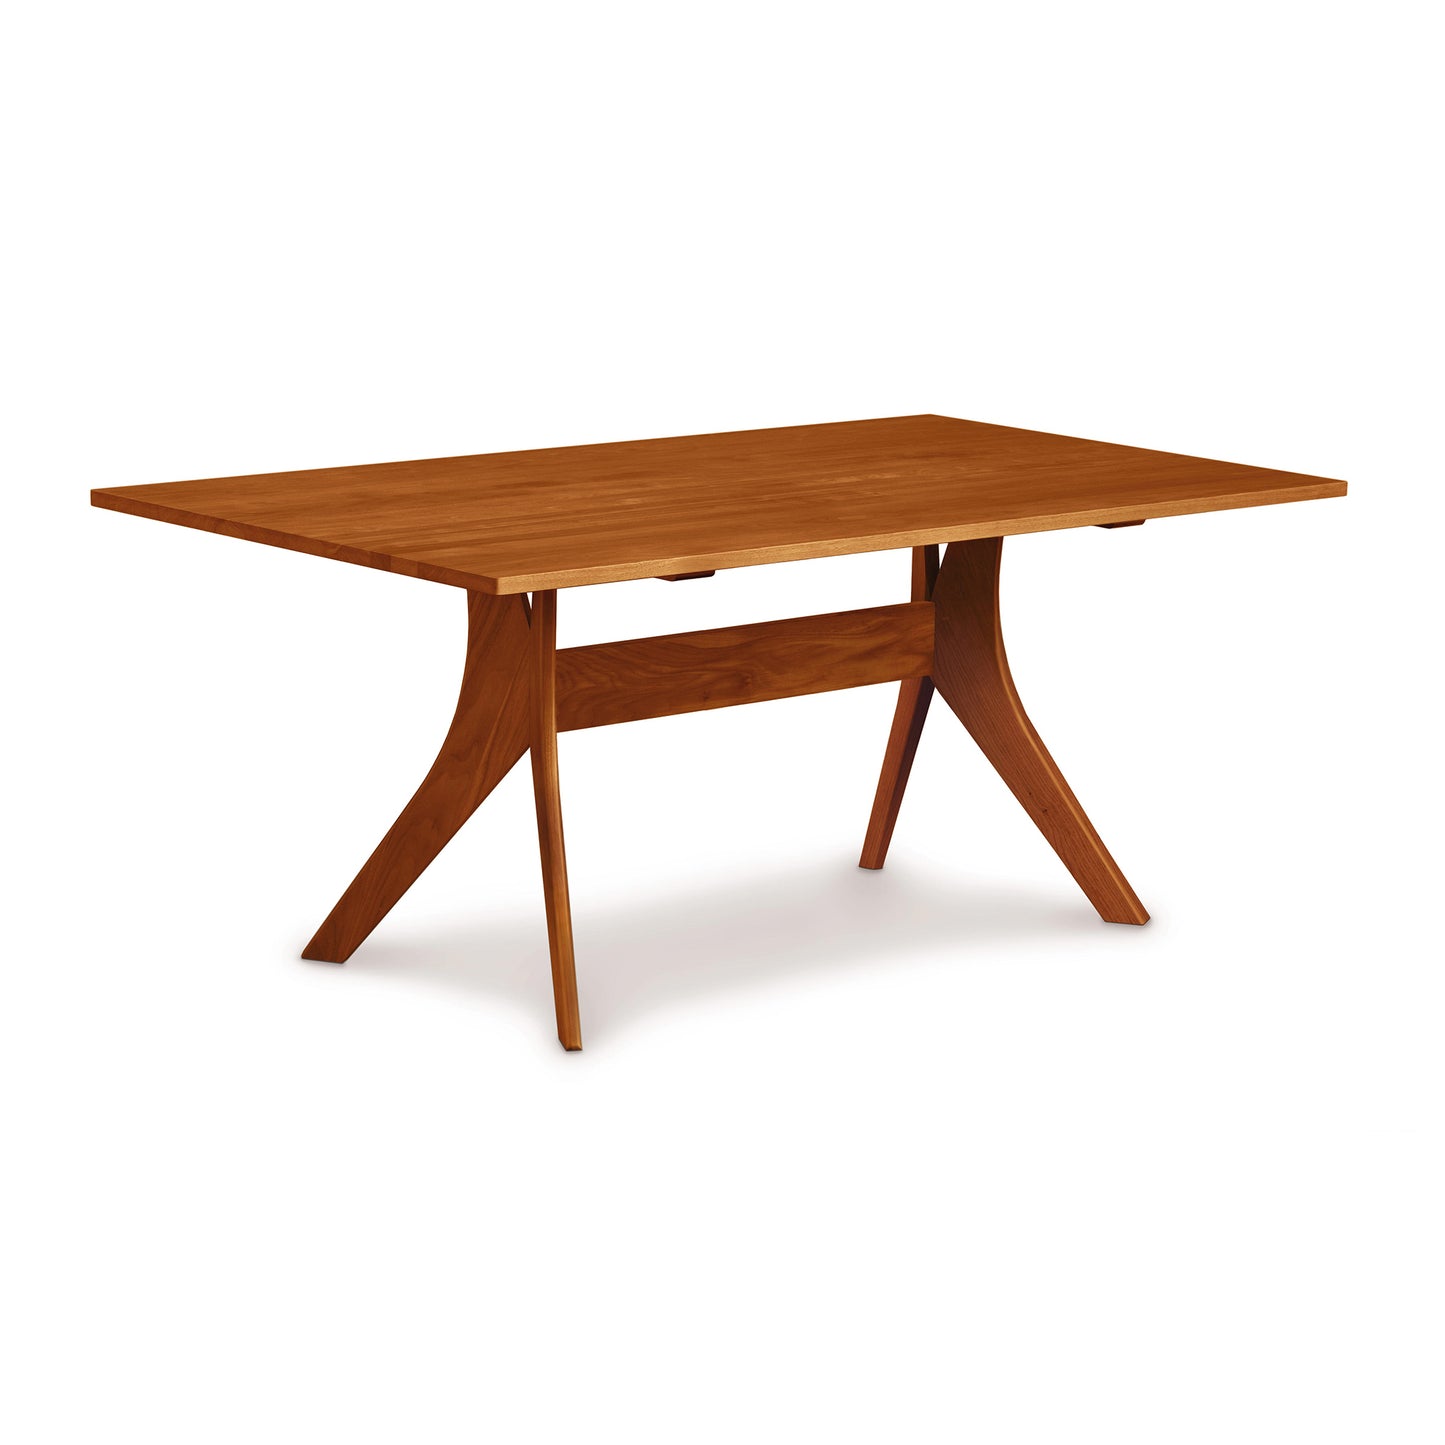 An Audrey Solid Top Dining Table by Copeland Furniture, handmade with a solid hardwood top.